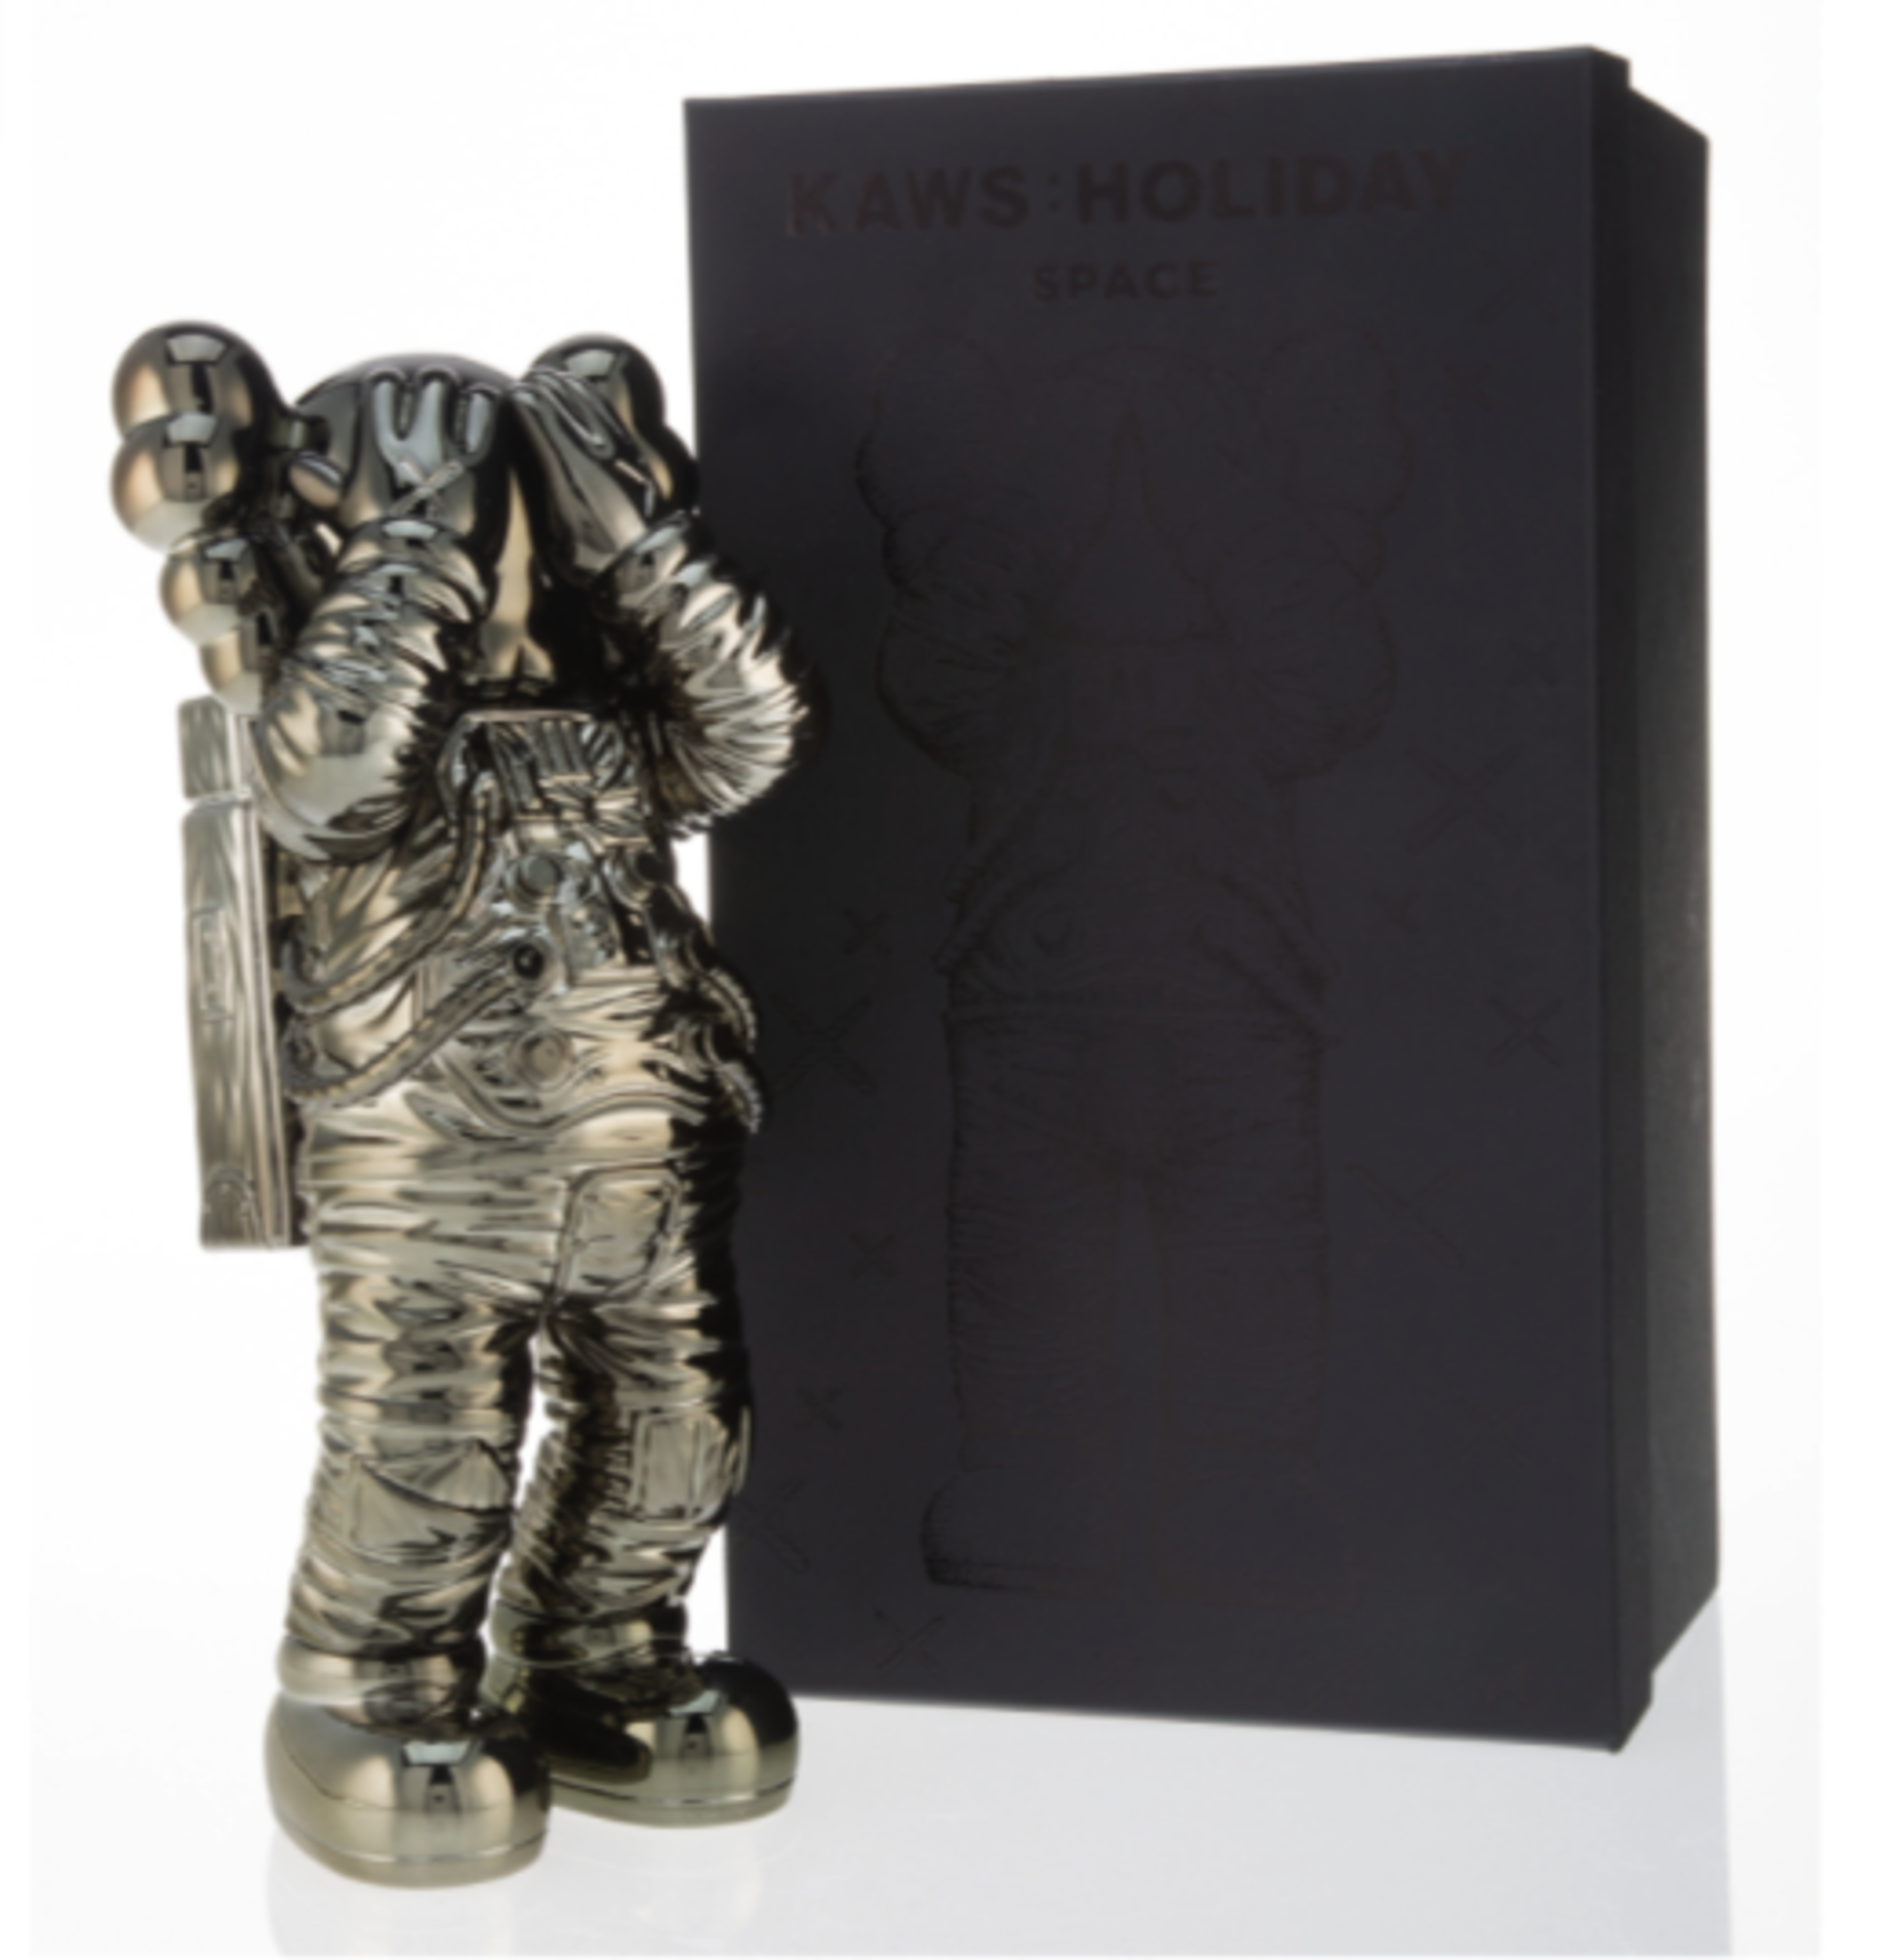 Holiday: Space (Black) by KAWS